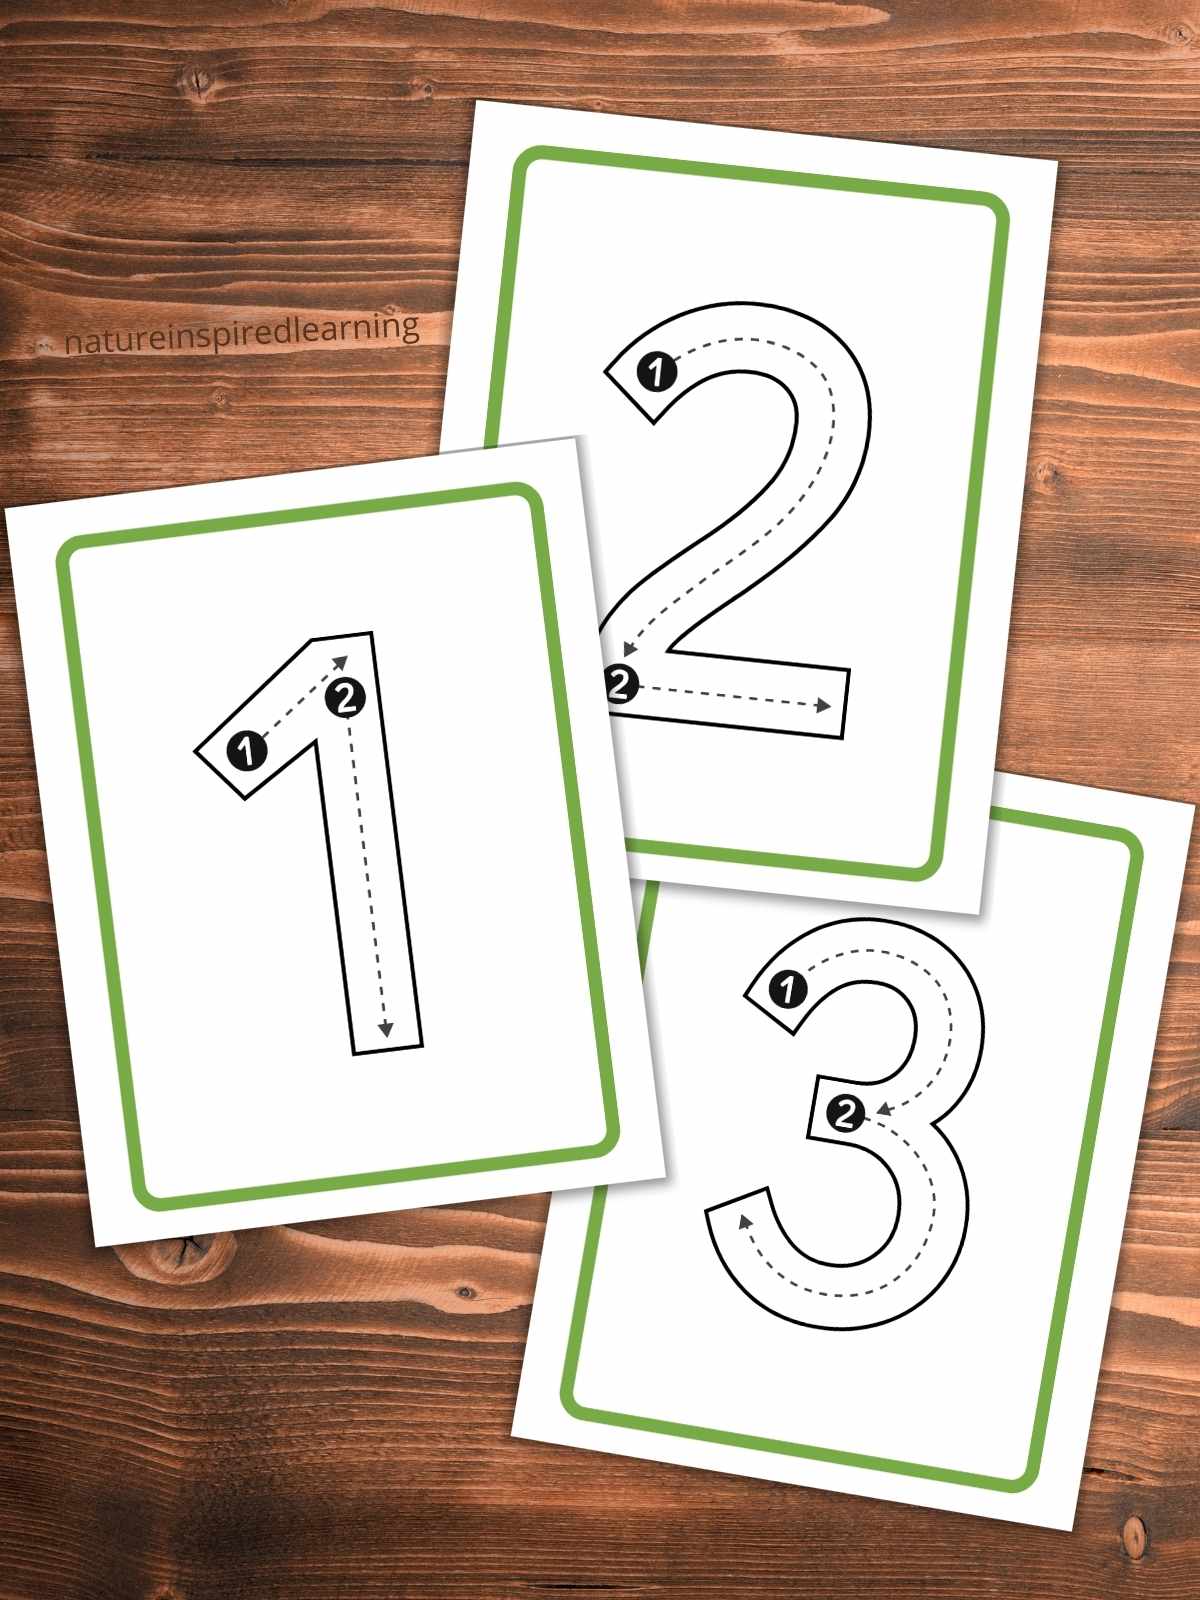 cut out number cards with numbers 1, 2, and 3 in outline form with tracing lines and numbers. Cards overlapping each other on a wooden backgound